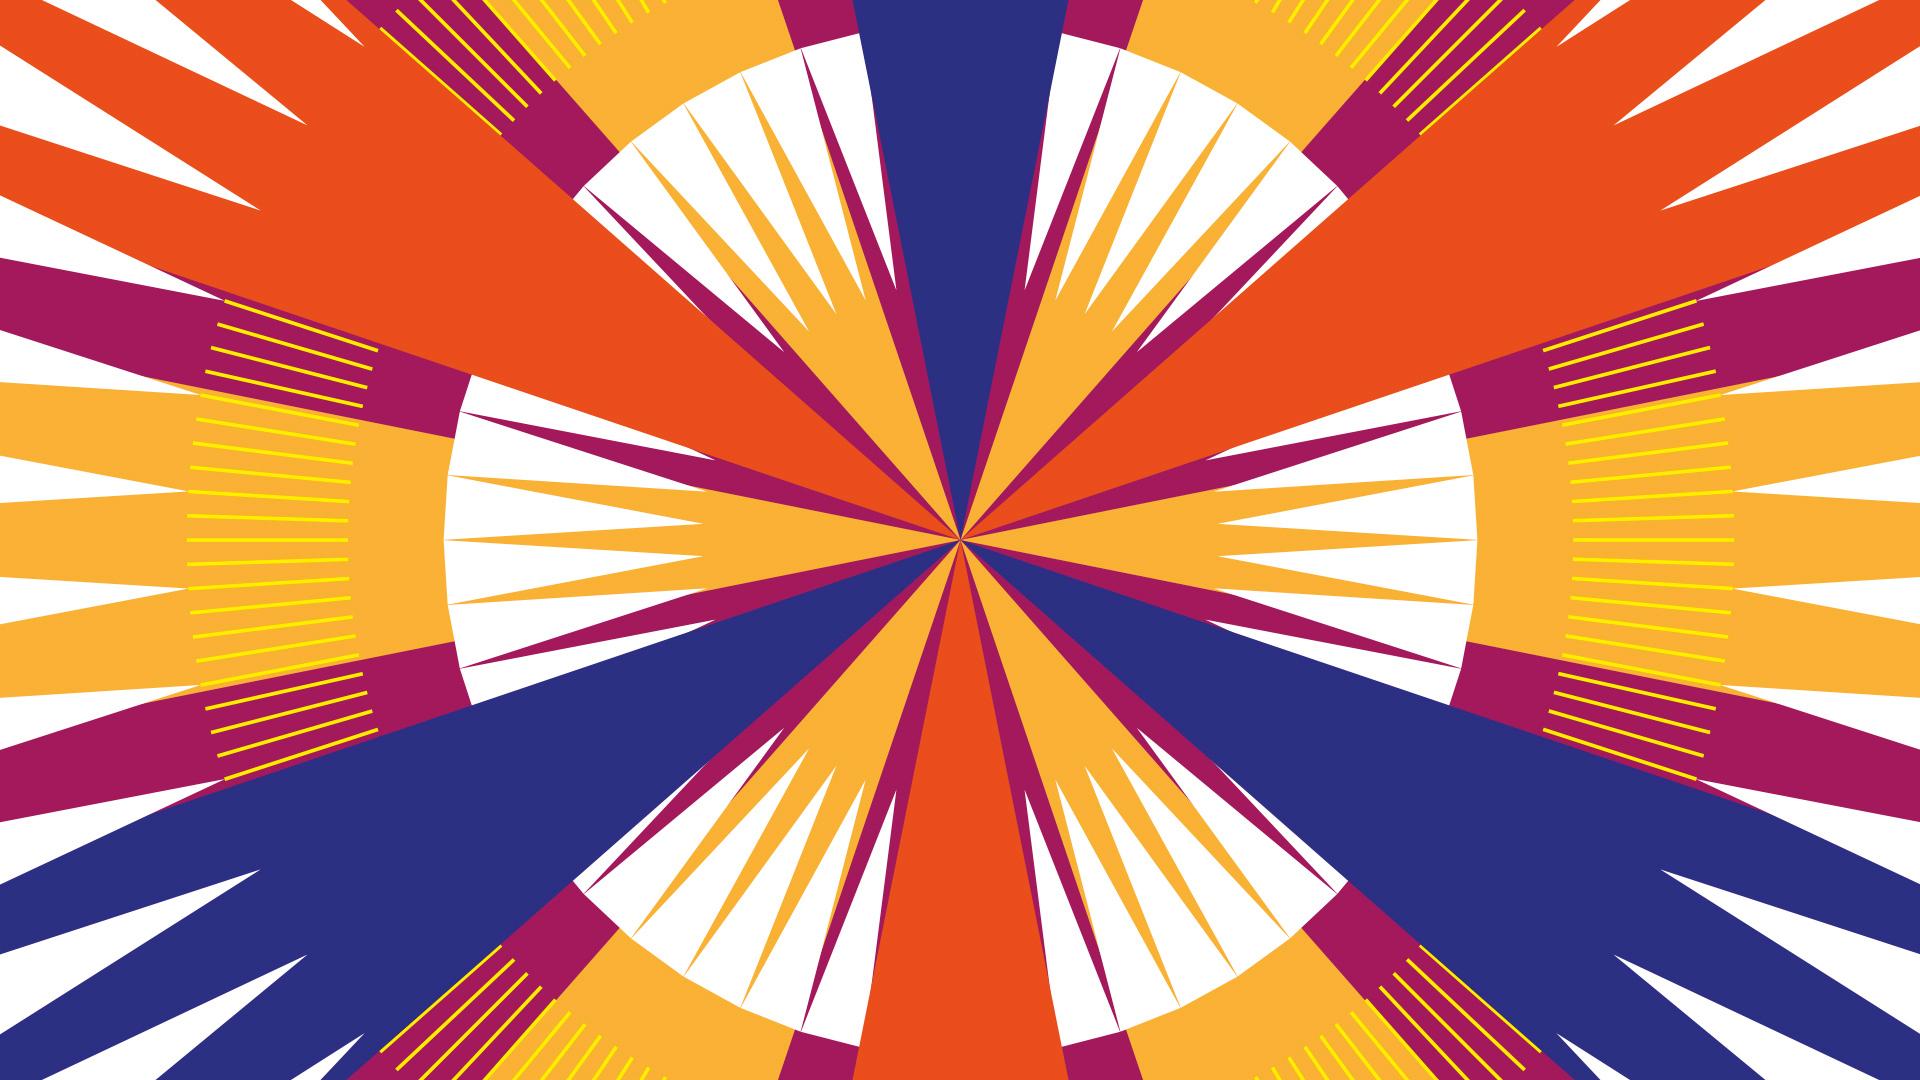 Quickly create a radial pattern using the Rotate tool in Illustrator